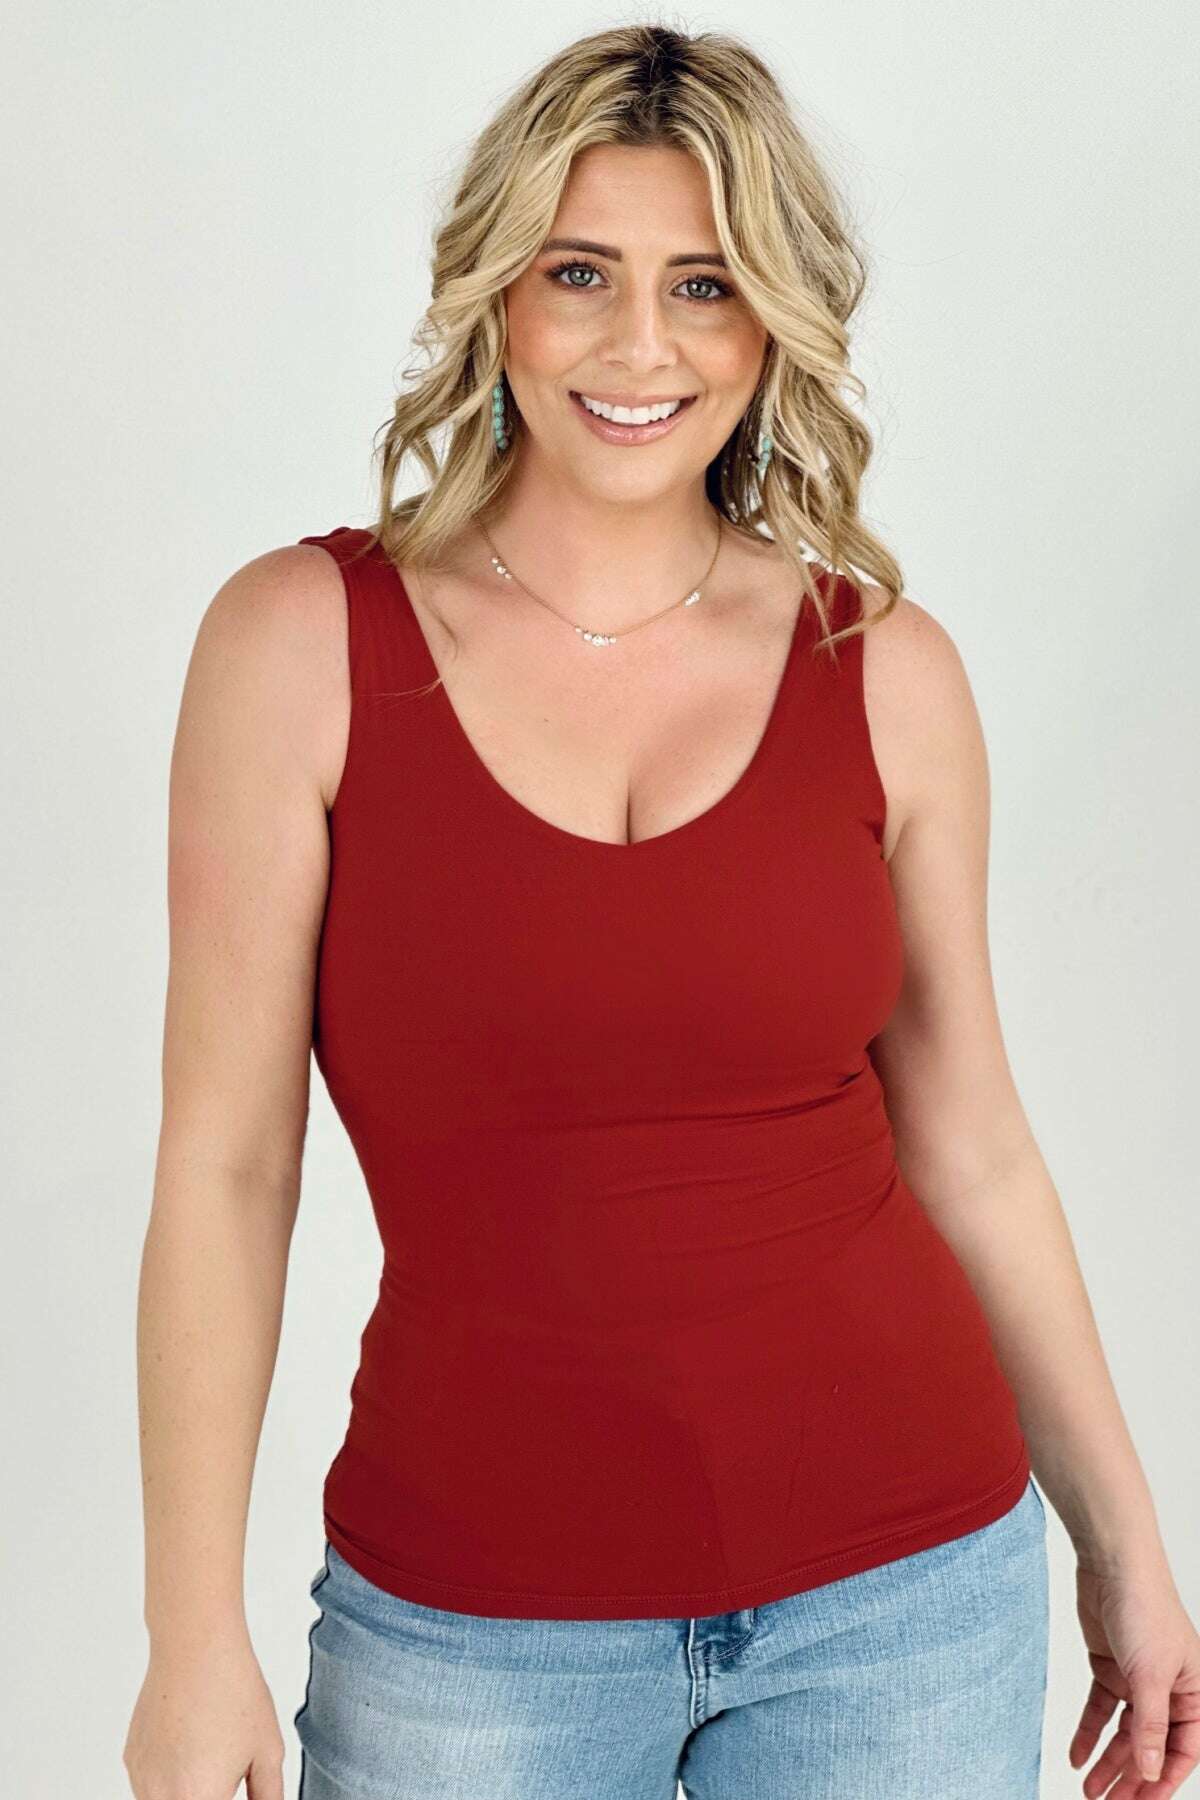 RUSTY RED - 5 Colors - FawnFit Medium Length Lift Tank 2.0 - Ships from The US - Tank Tops & Camis at TFC&H Co.